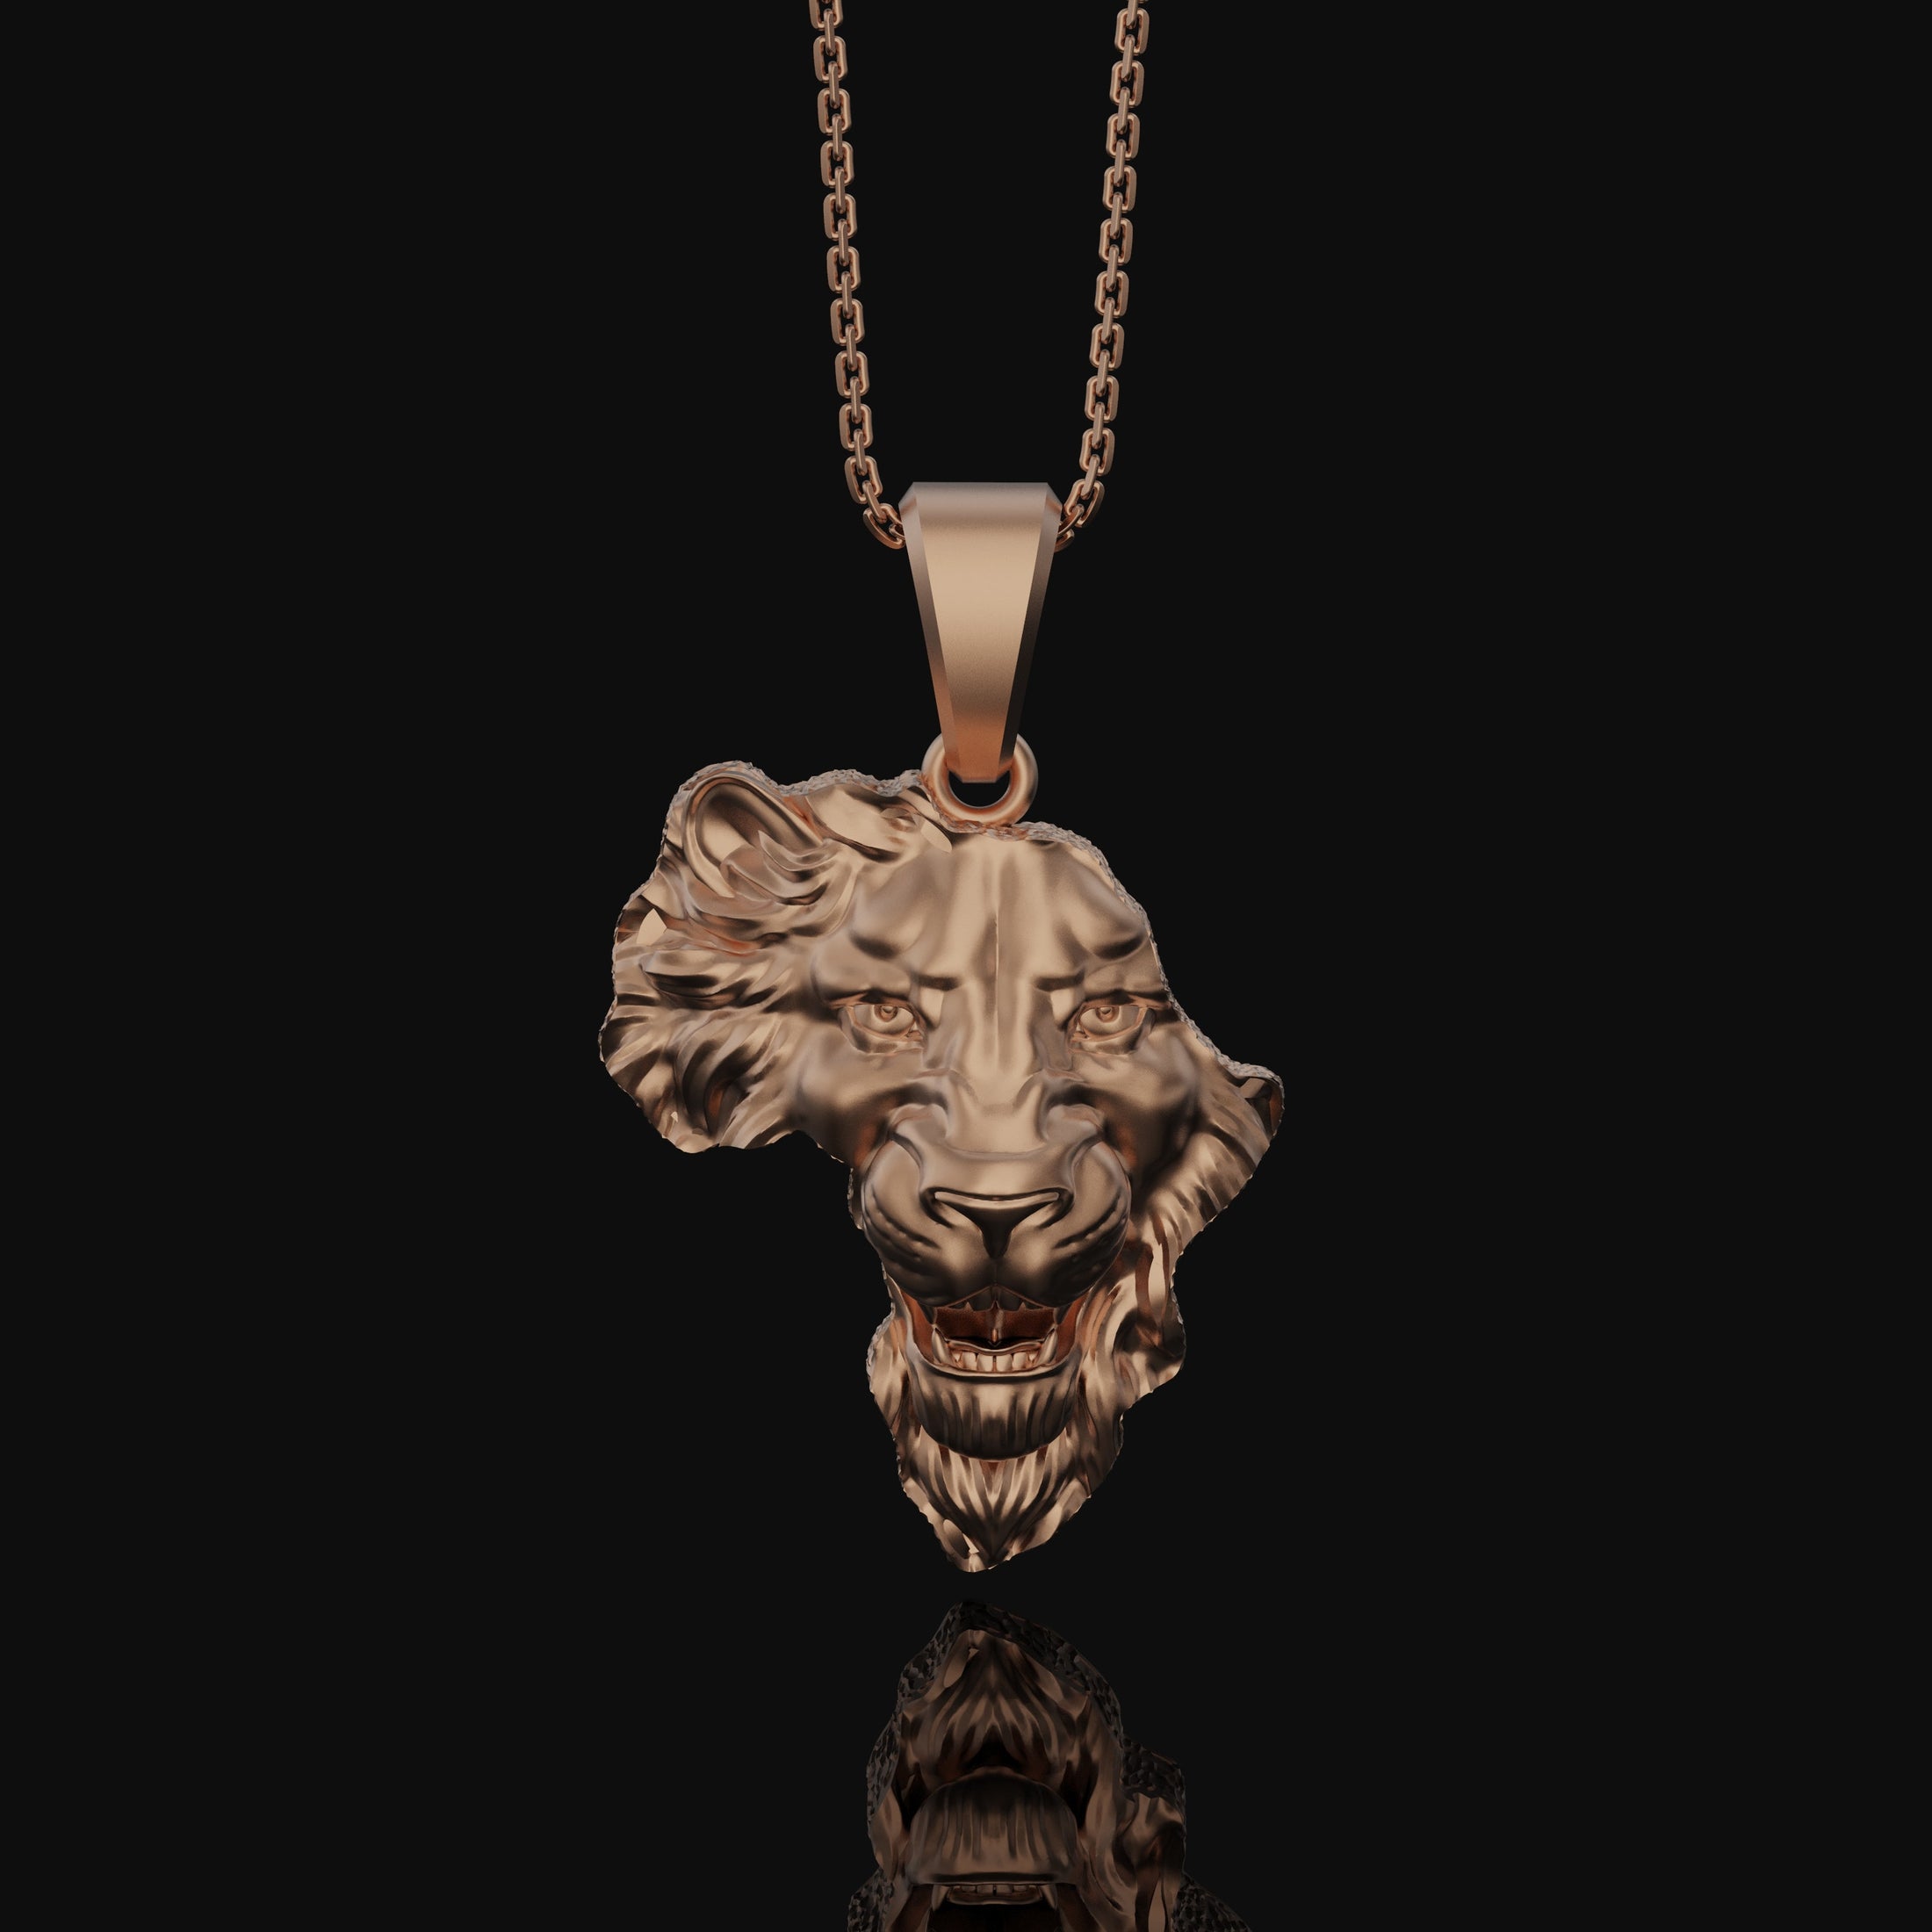 Silver Africa Continent Shaped Lion Head Necklace - Majestic Safari Style Pendant, Elegant Wildlife African Pride Jewelry Rose Gold Finish